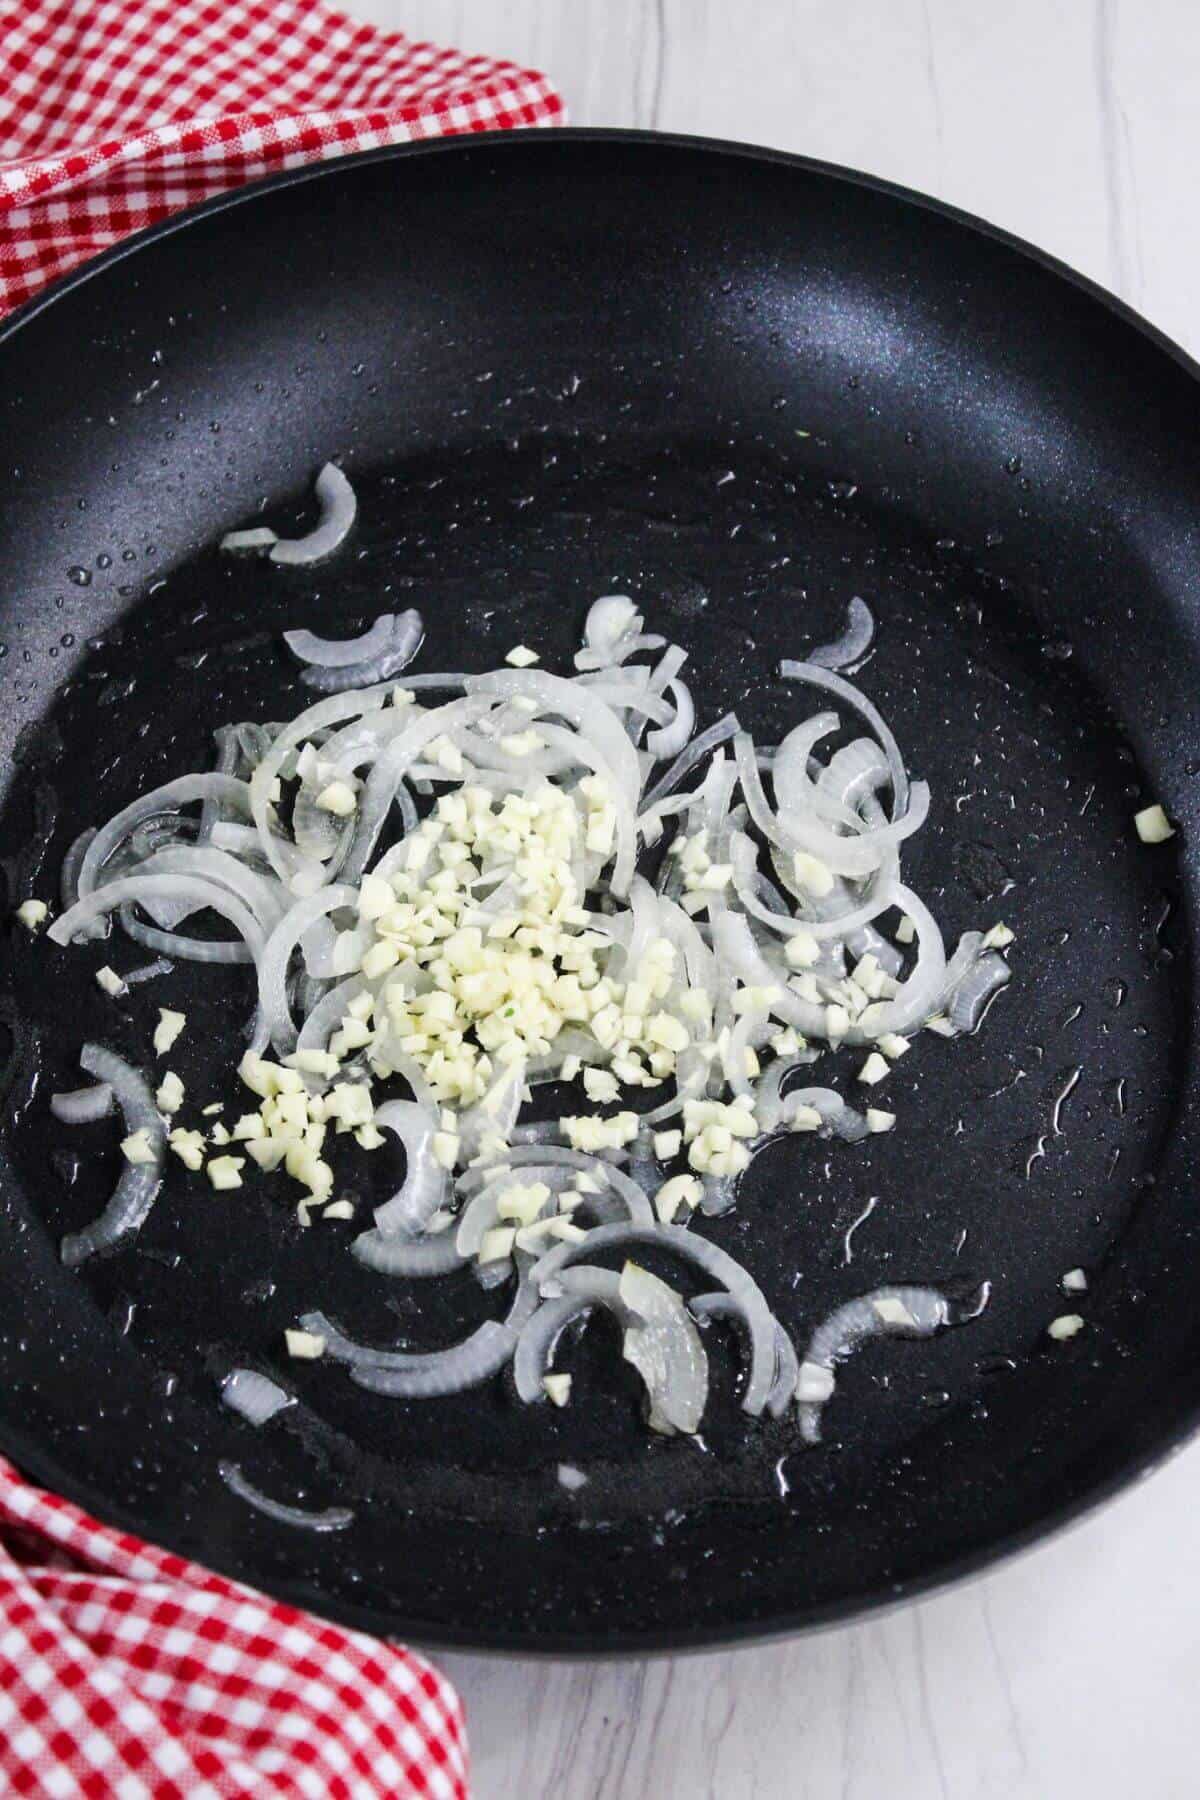 Fried onions and garlic in a frying pan.